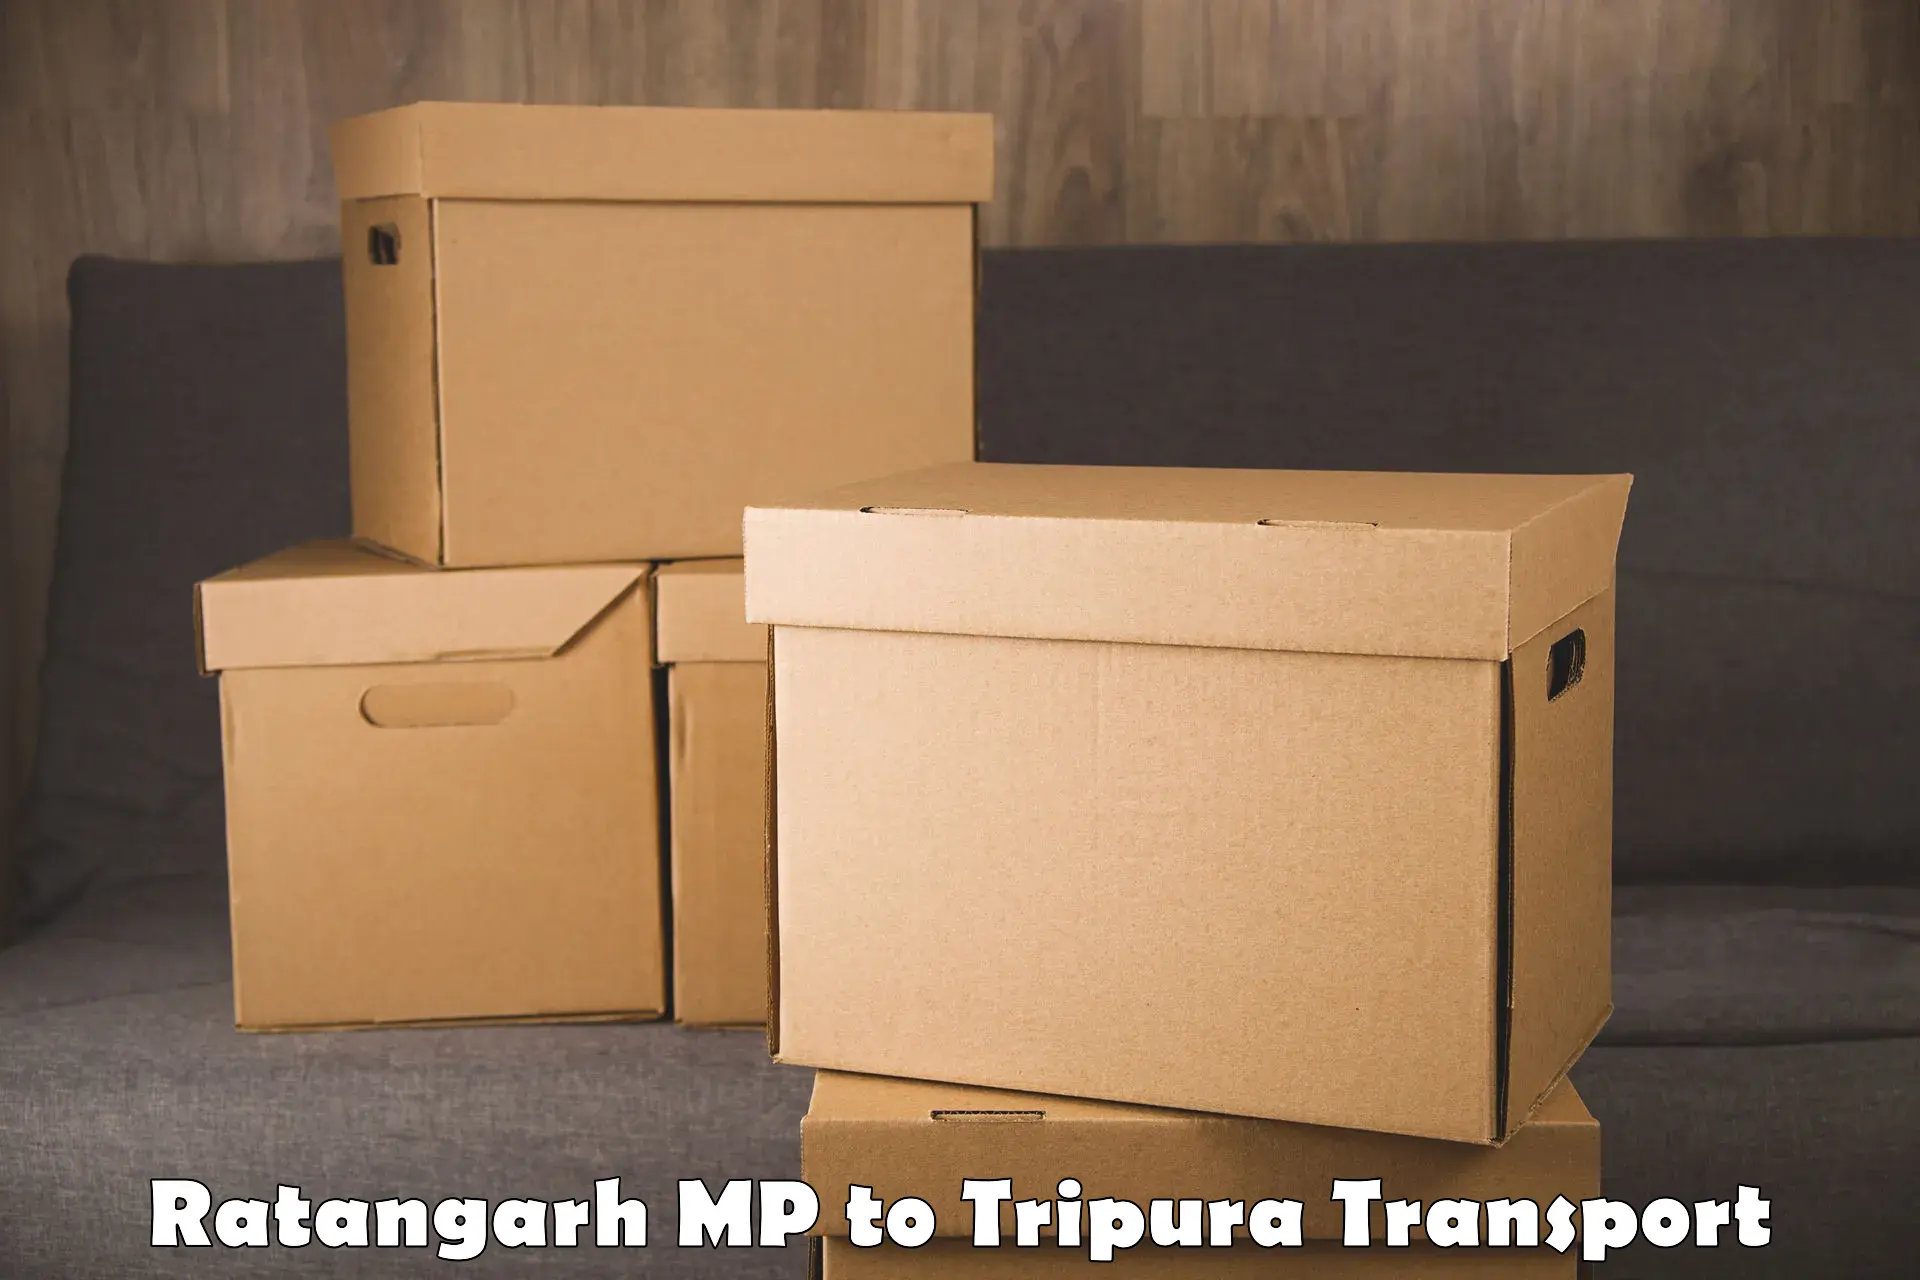 Air freight transport services in Ratangarh MP to Udaipur Tripura